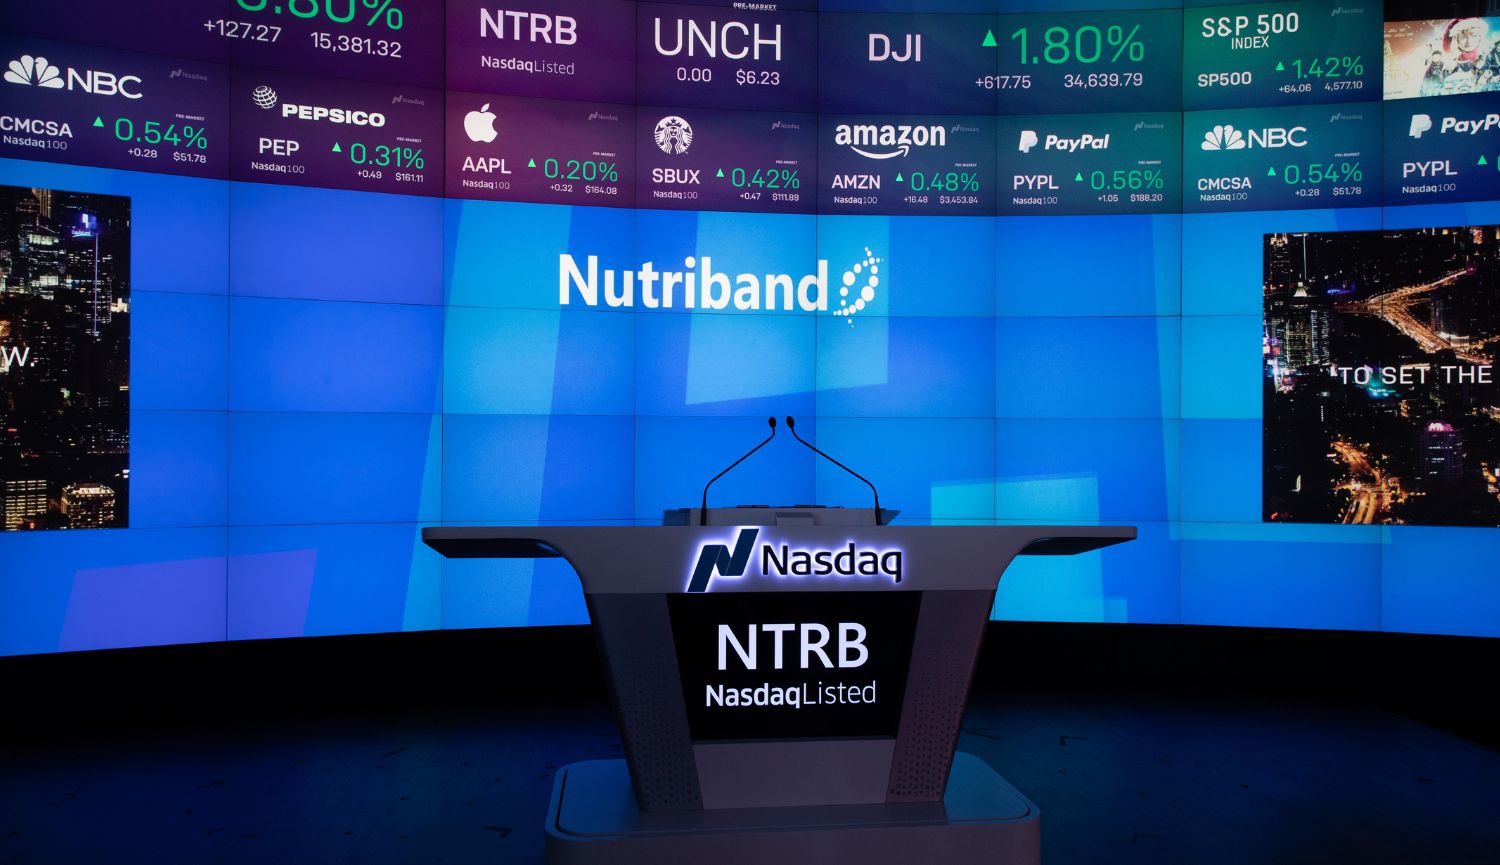 Nutriband Inc., Friday, July 14, 2023, Press release picture